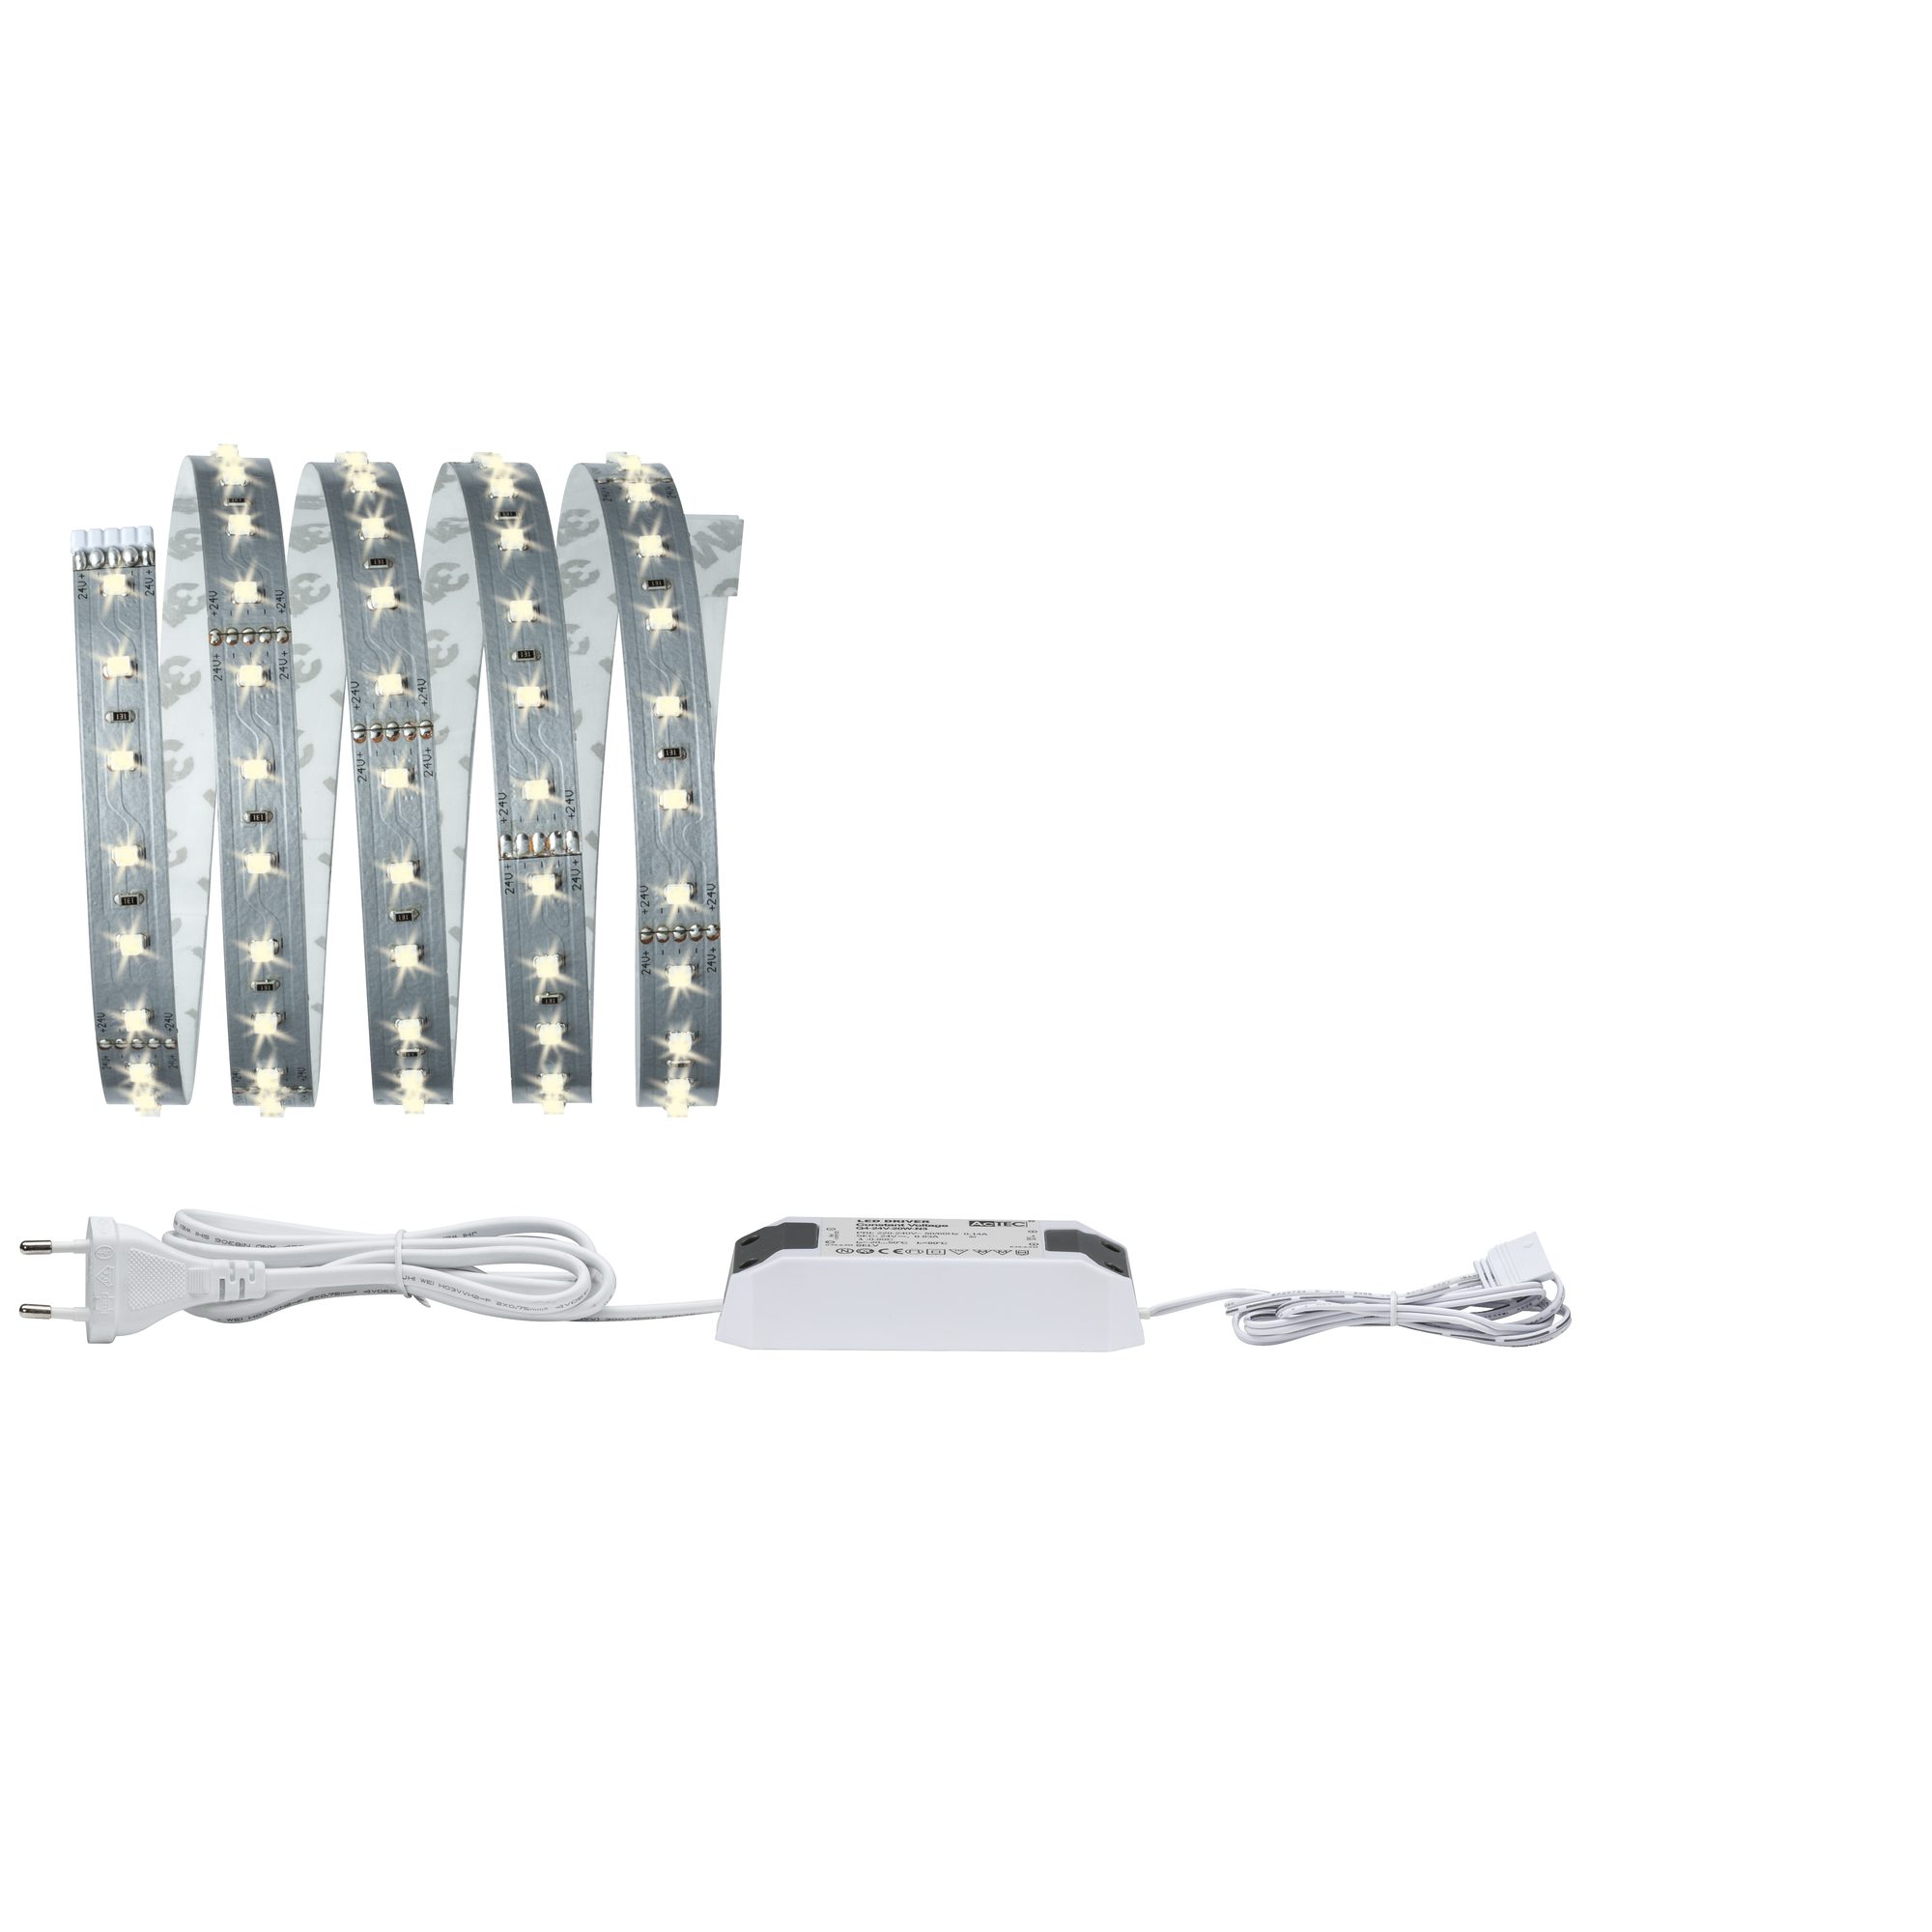 Function MaxLED 500 Basisset 1,5 m warmweiß 10 W 230/24 V 20 VA Silber + product picture